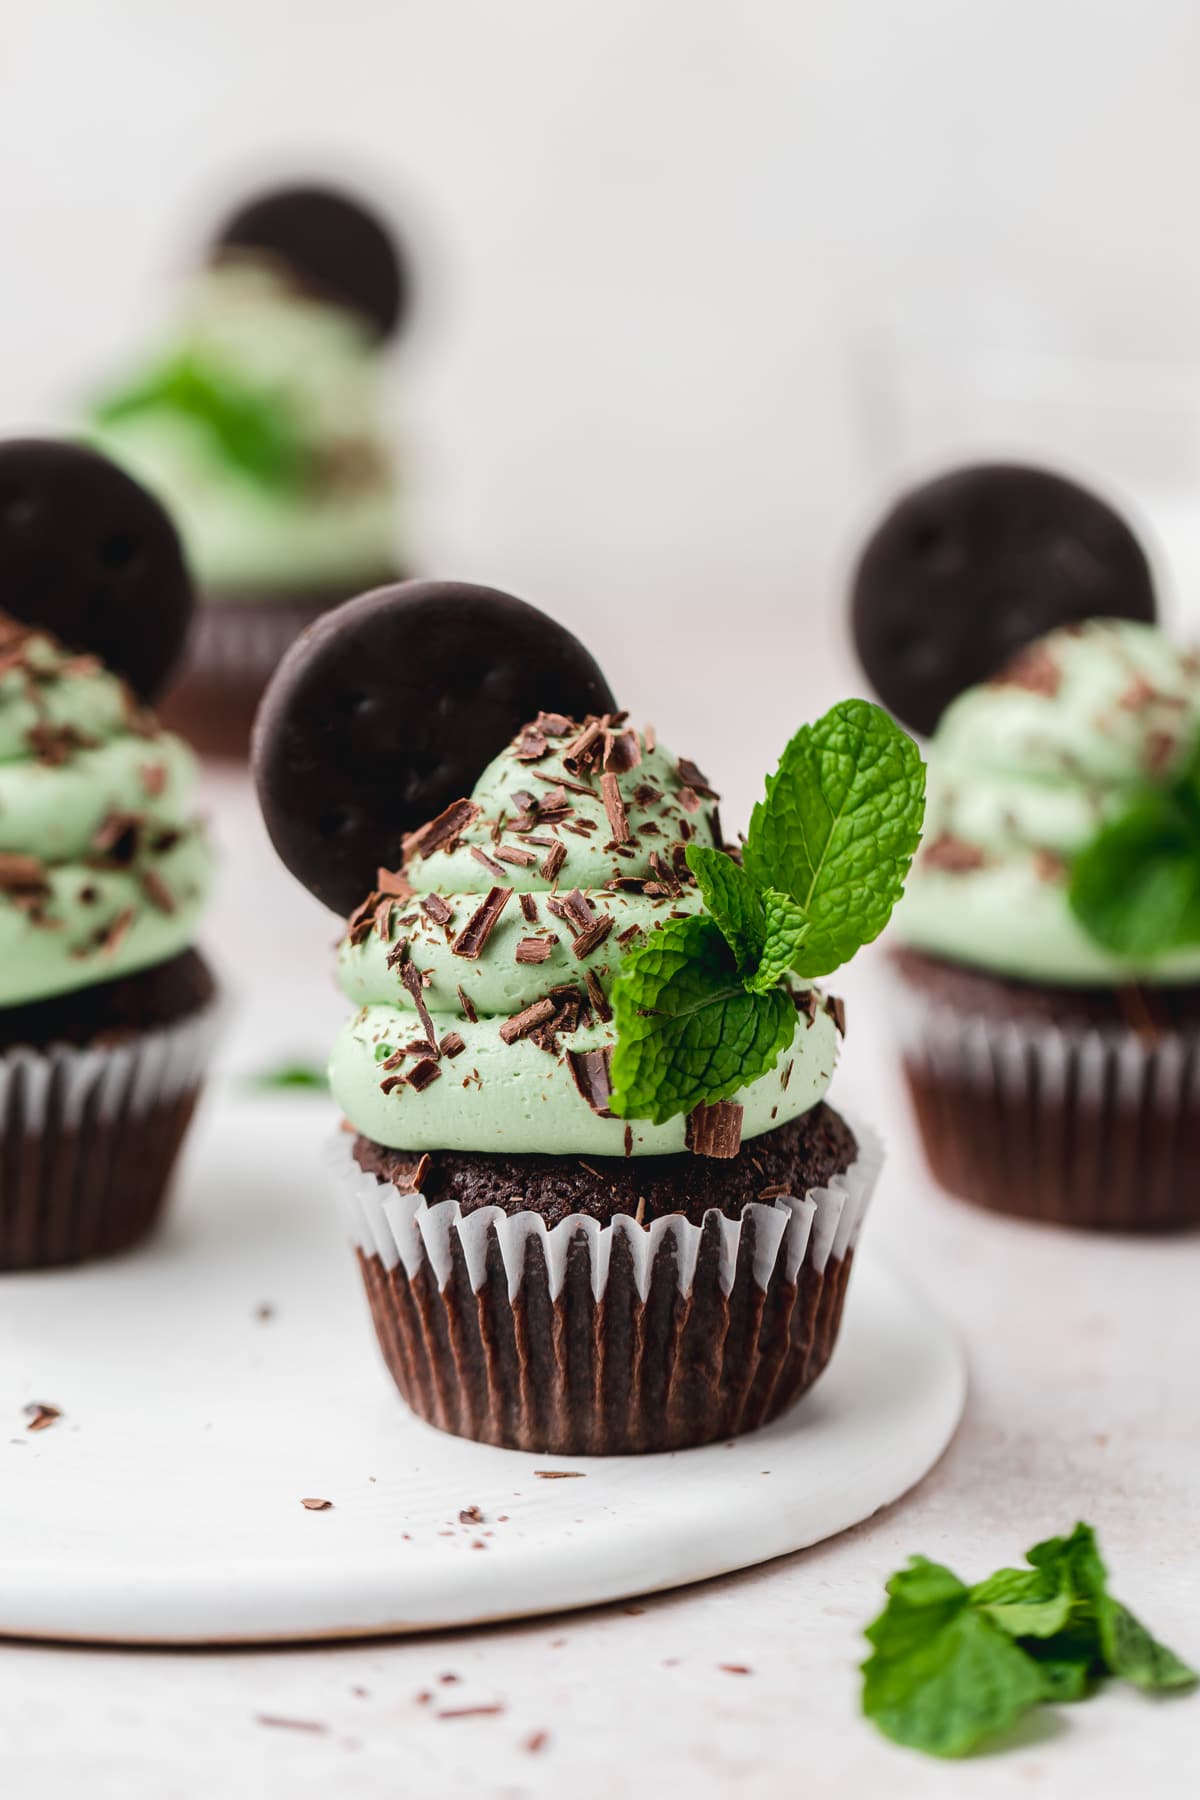 mint chocolate cupcakes garnished with thin mint cookie and chocolate curls.